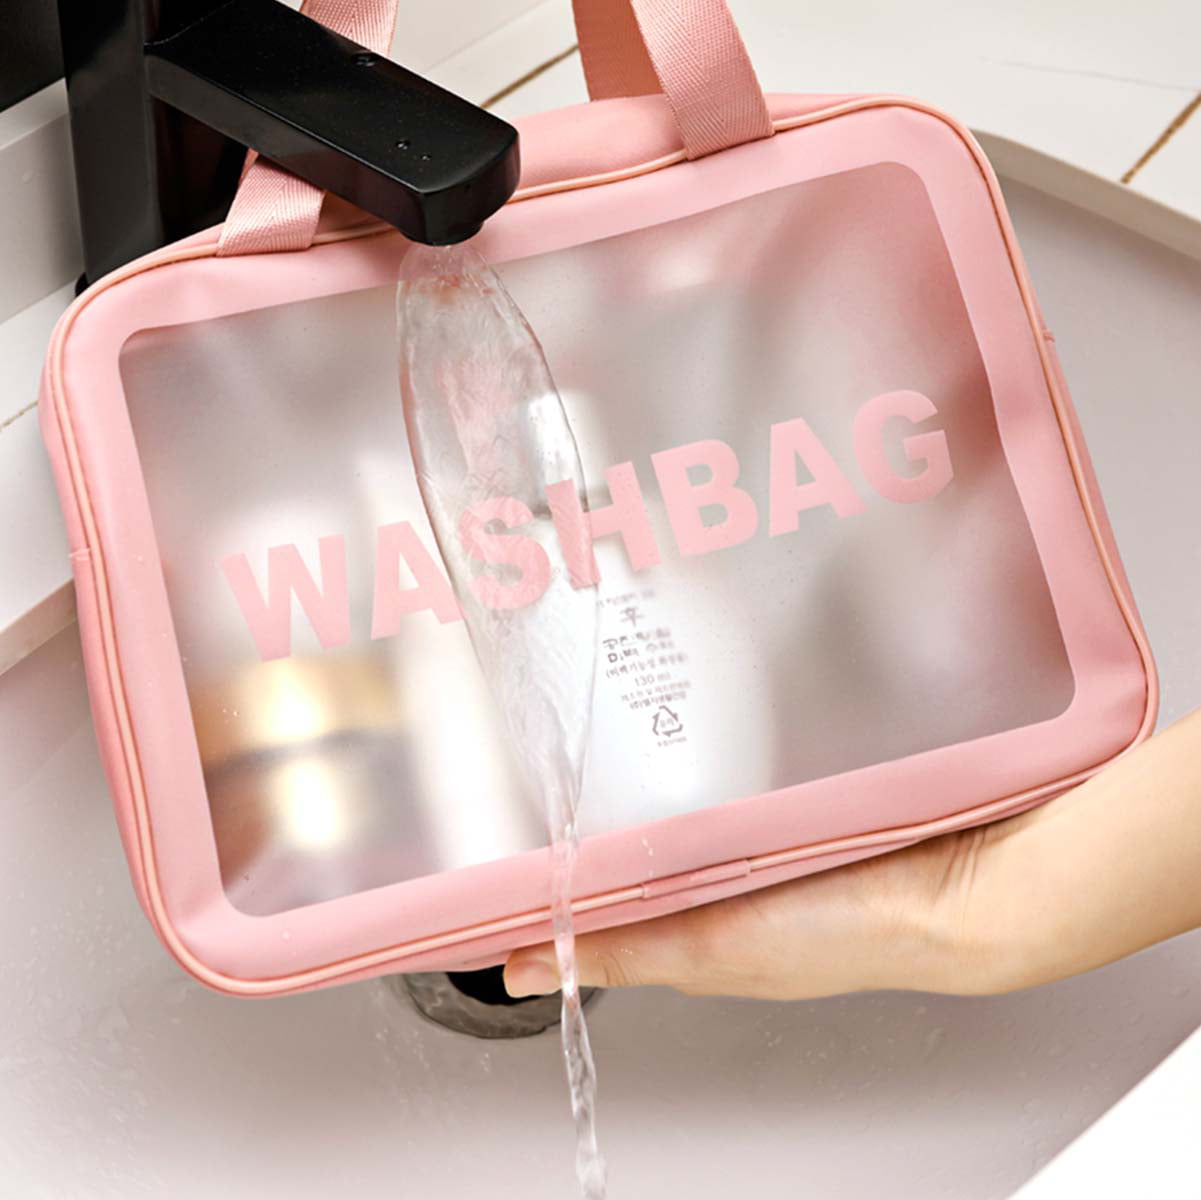 15 Pack Clear Toiletry Bag, Transparent Travel Pouch Bag Handle Straps  Makeup Cosmetic Bag with Zipper for Women Men Traveling Business Trip Home